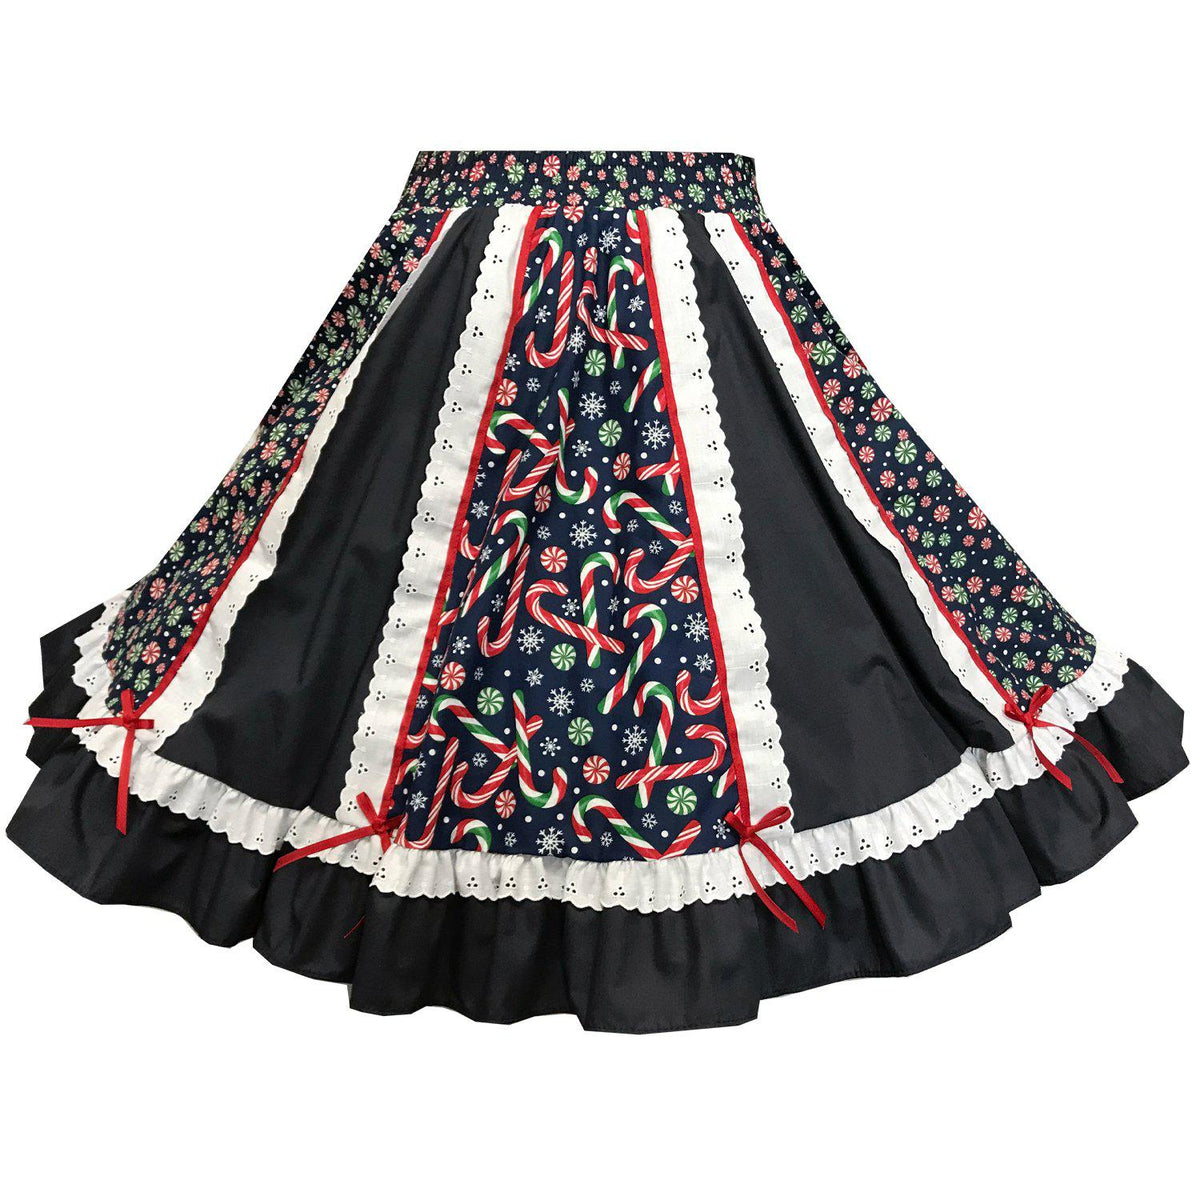 Candy Cane Fun Square Dance Skirt